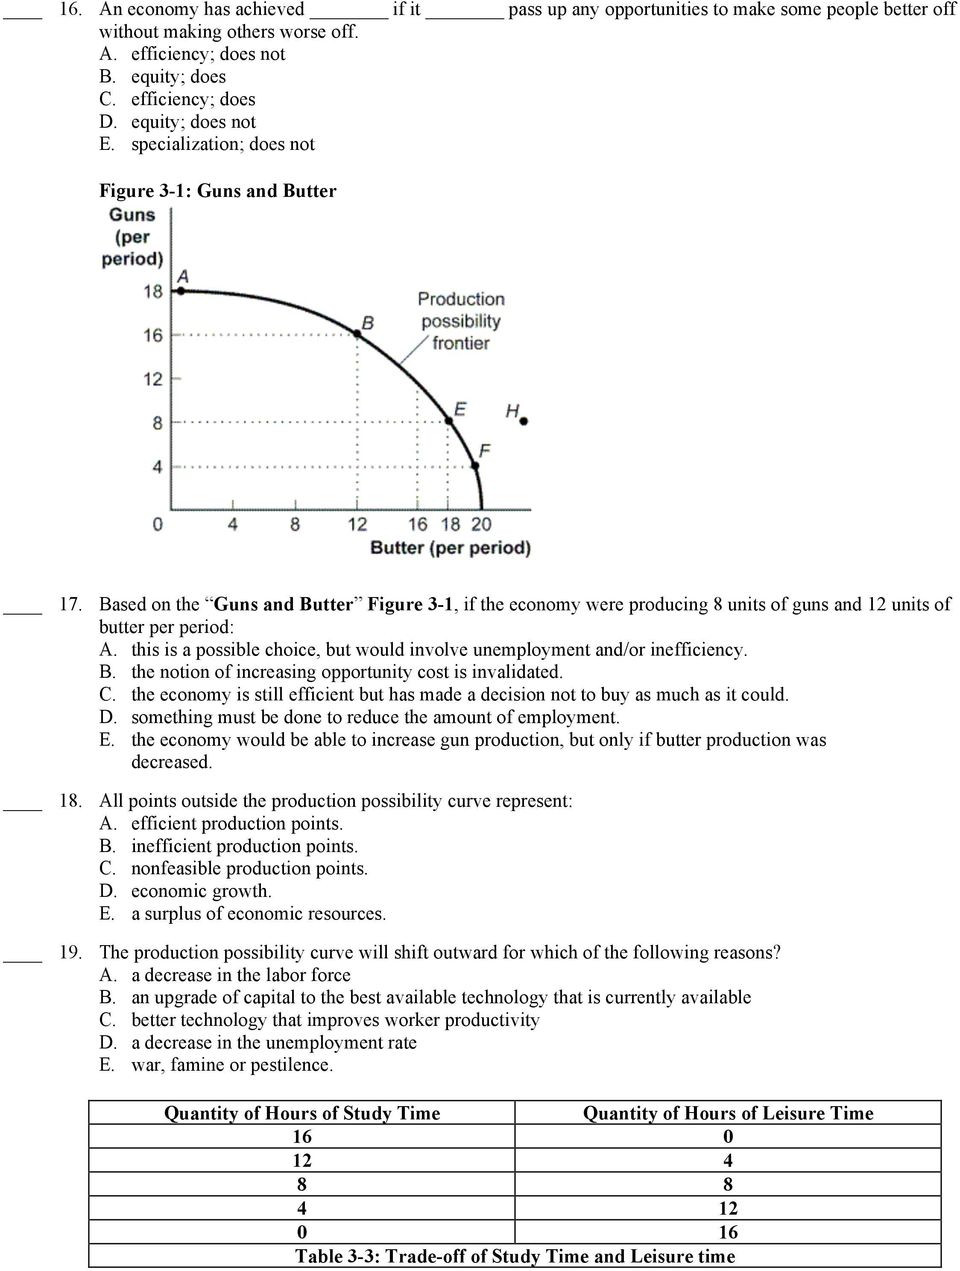 Production Possibilities Curve Worksheet Answers Homework Help Production Possibilites Schedules